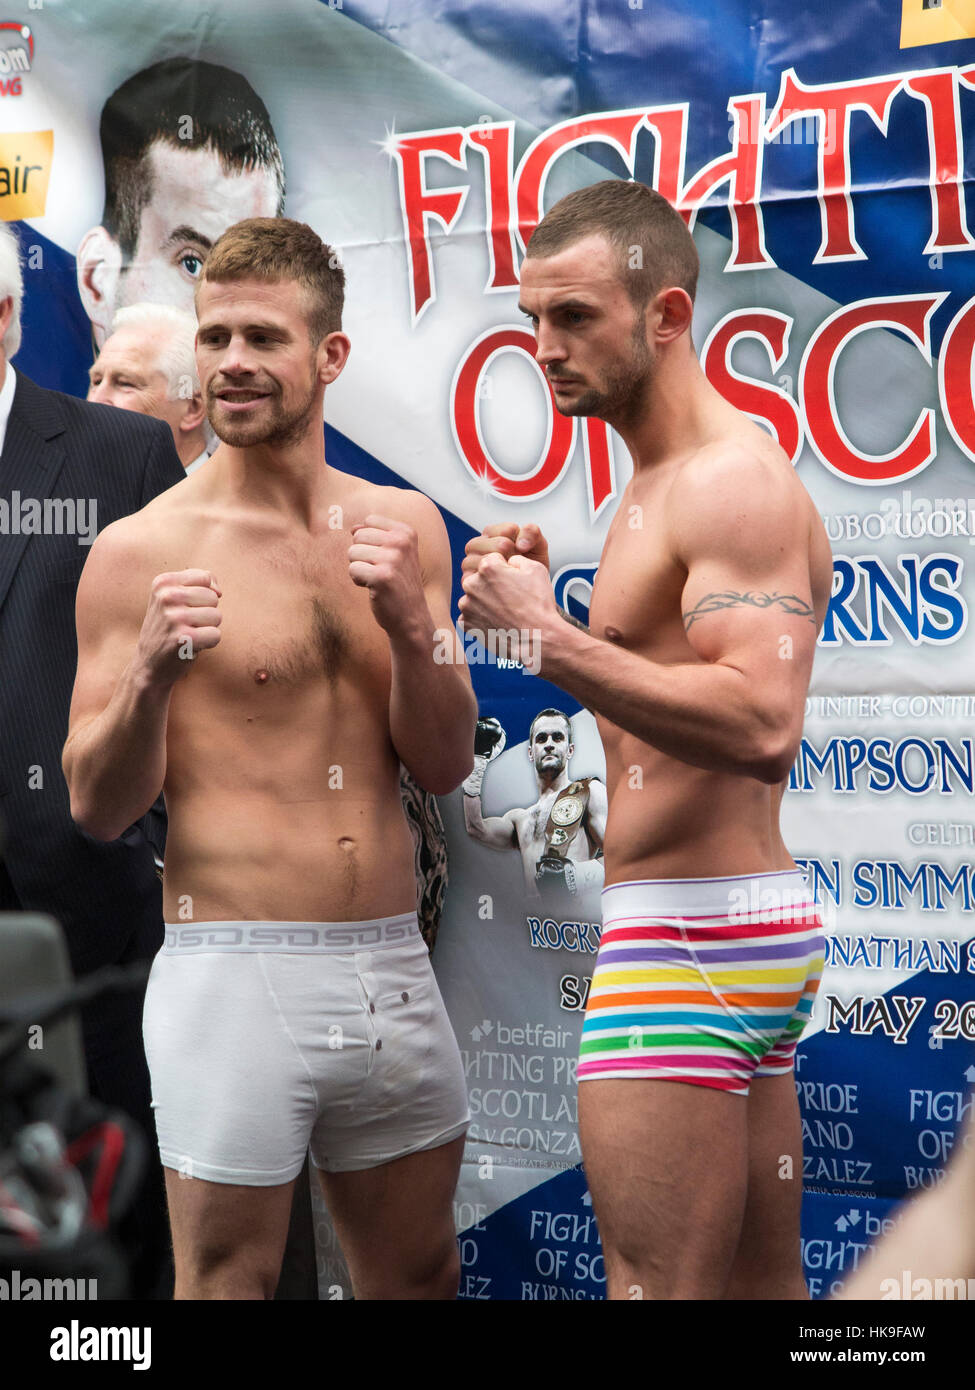 Boxing weigh-in in Glasgow. Stock Photo